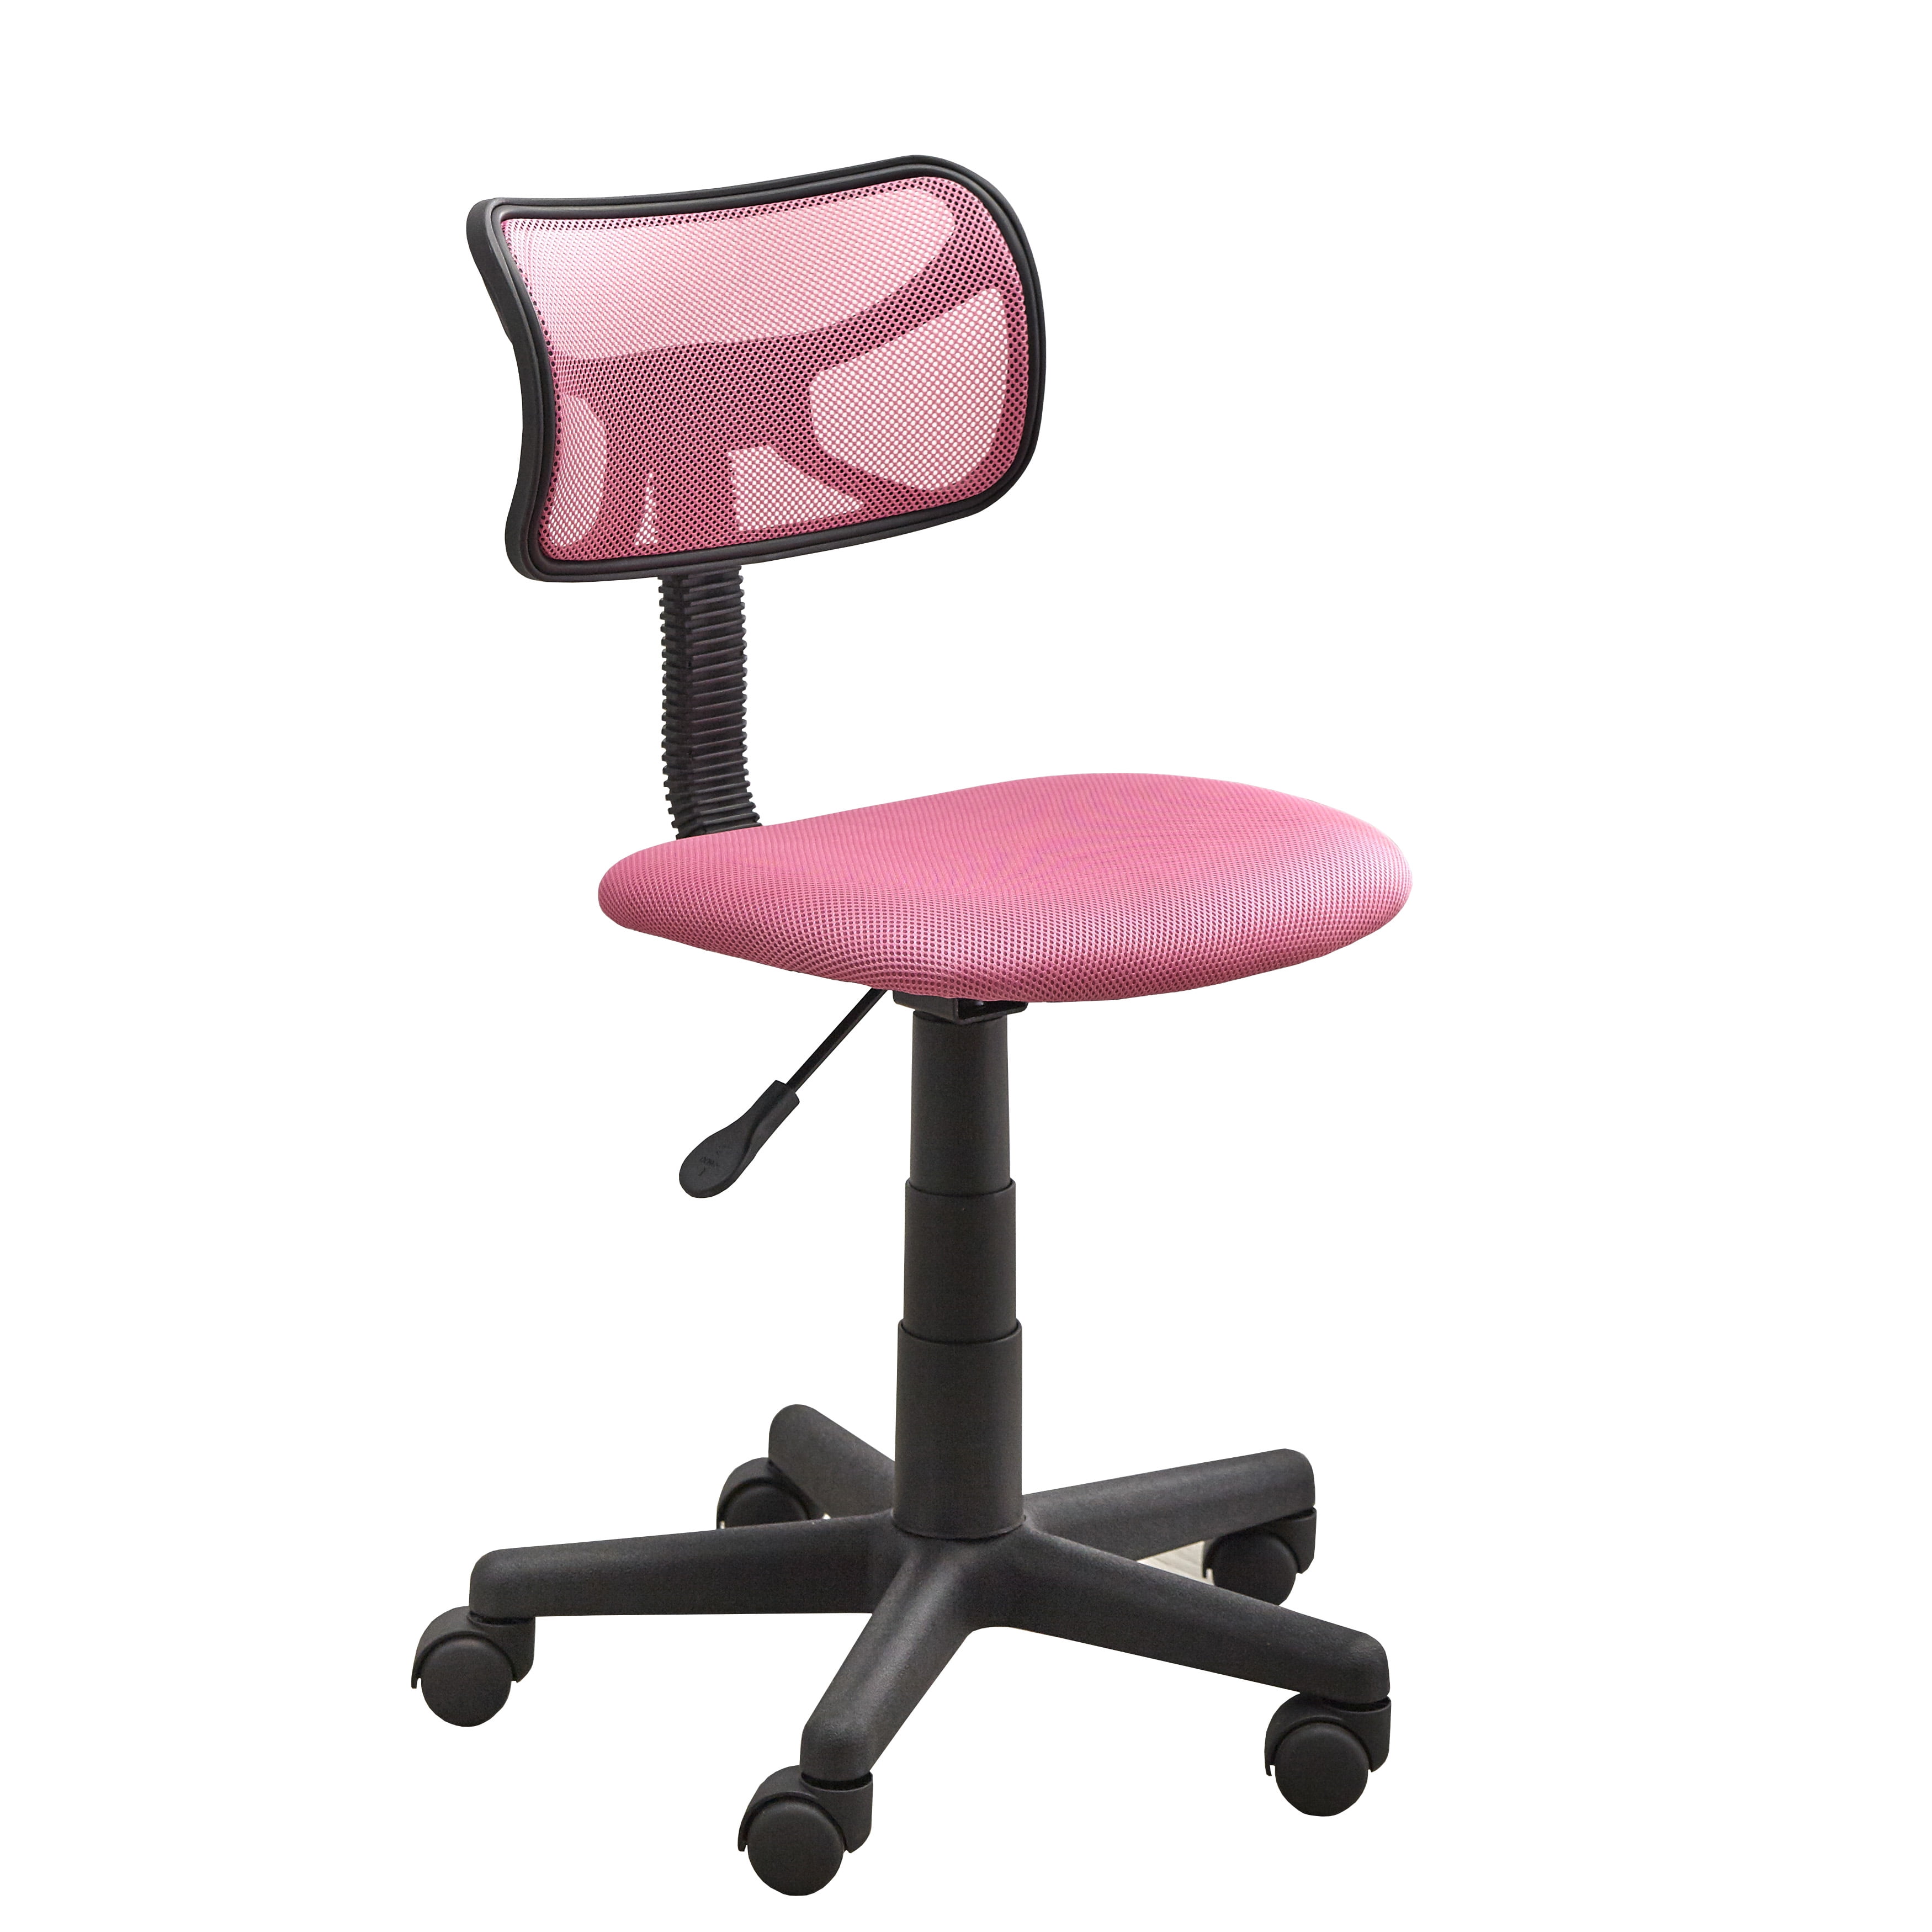 Quincy Kids Desk Chair, Gray or Pink, Adjustable and ...